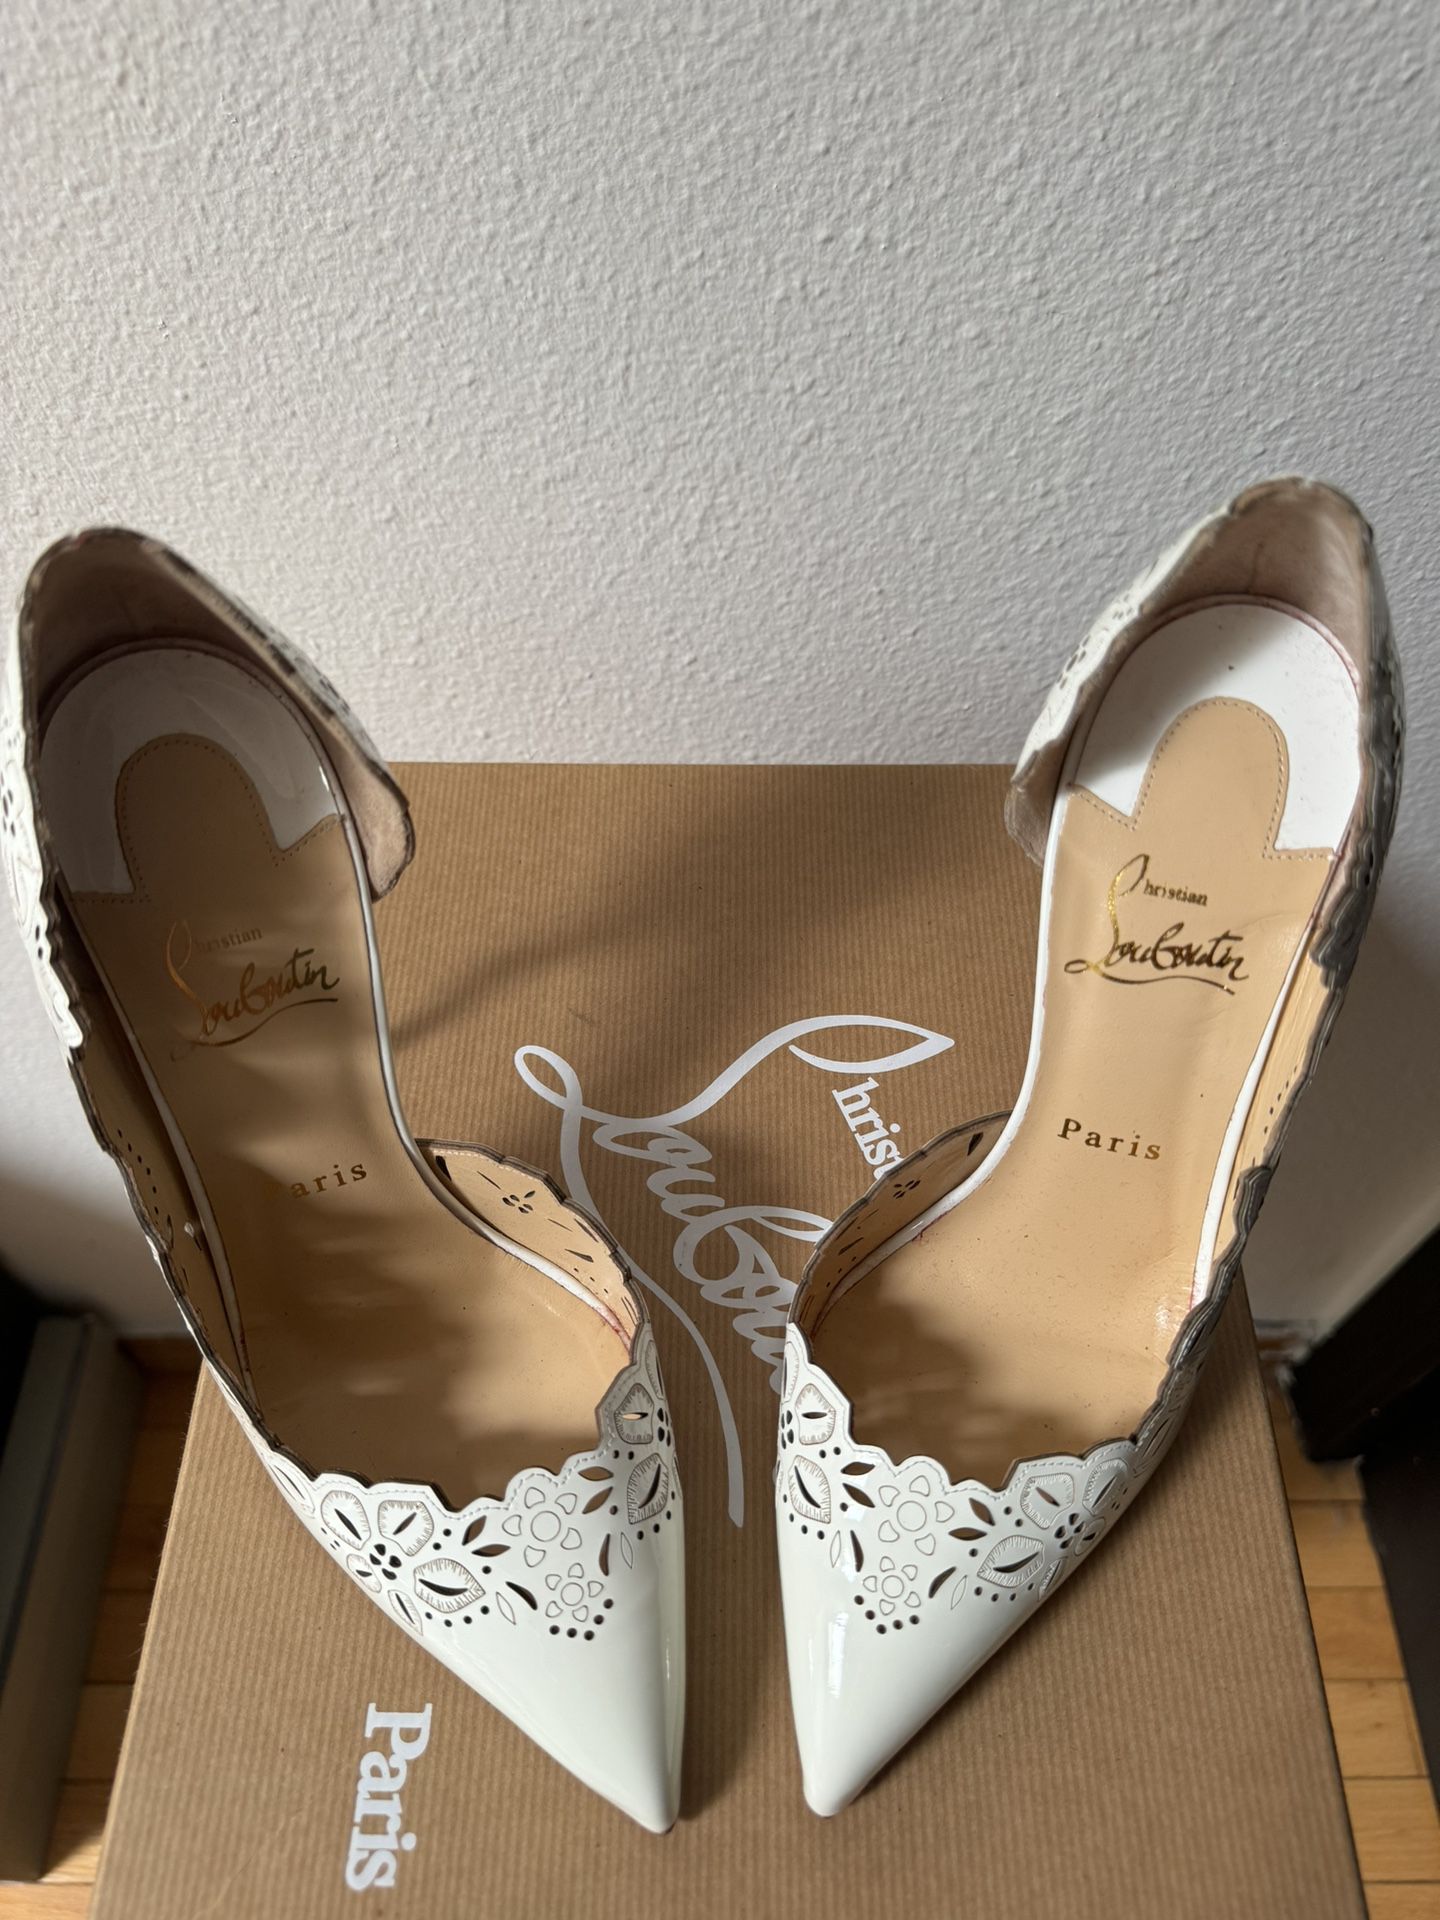 Brand New Christian Louboutin Limited, Edition Pumps Size 38